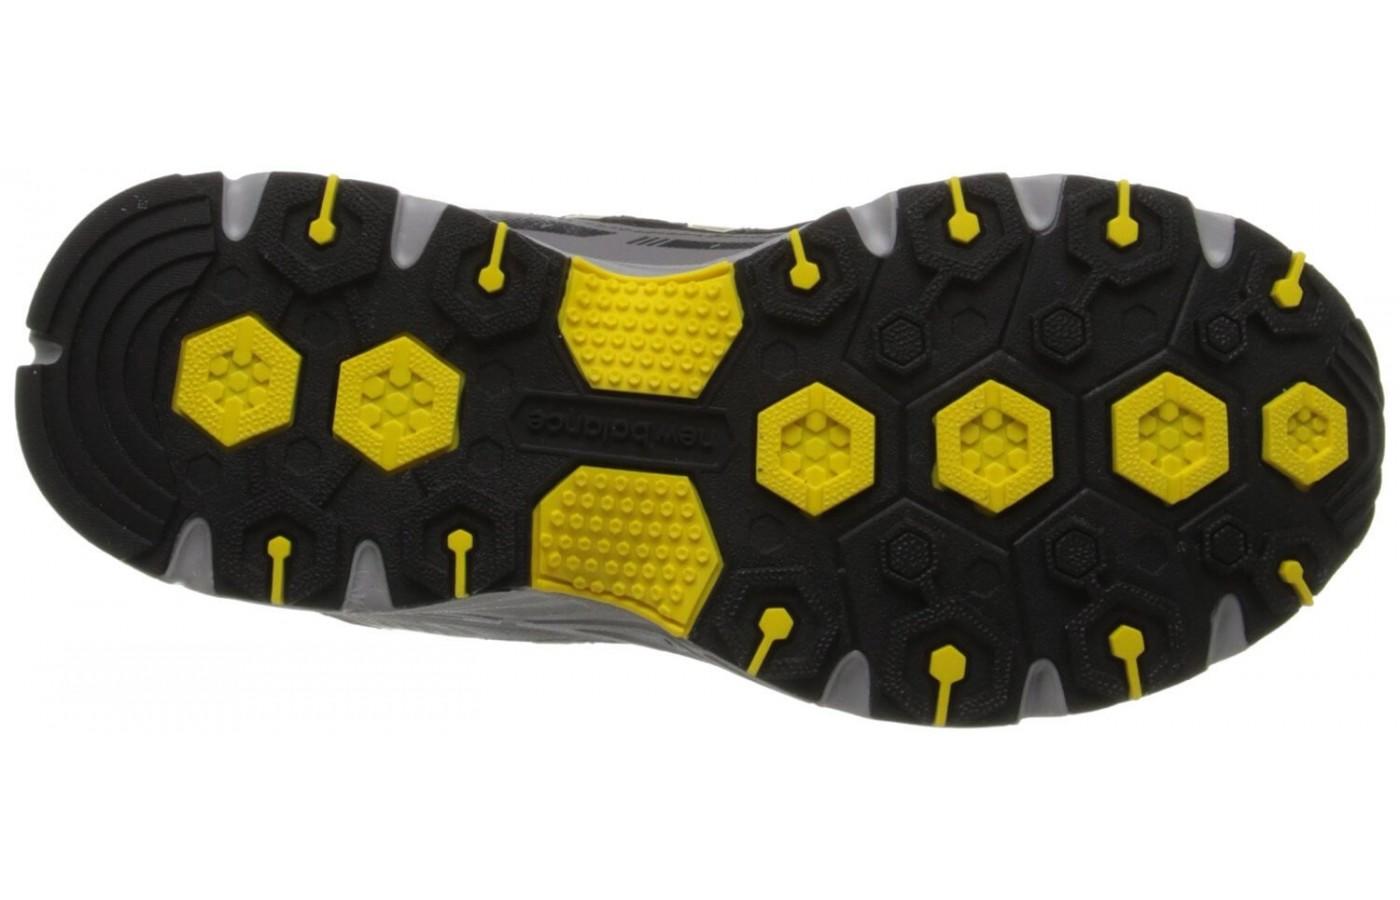 The outsoles of the New Balance MT510 are geared toward roads and trails.